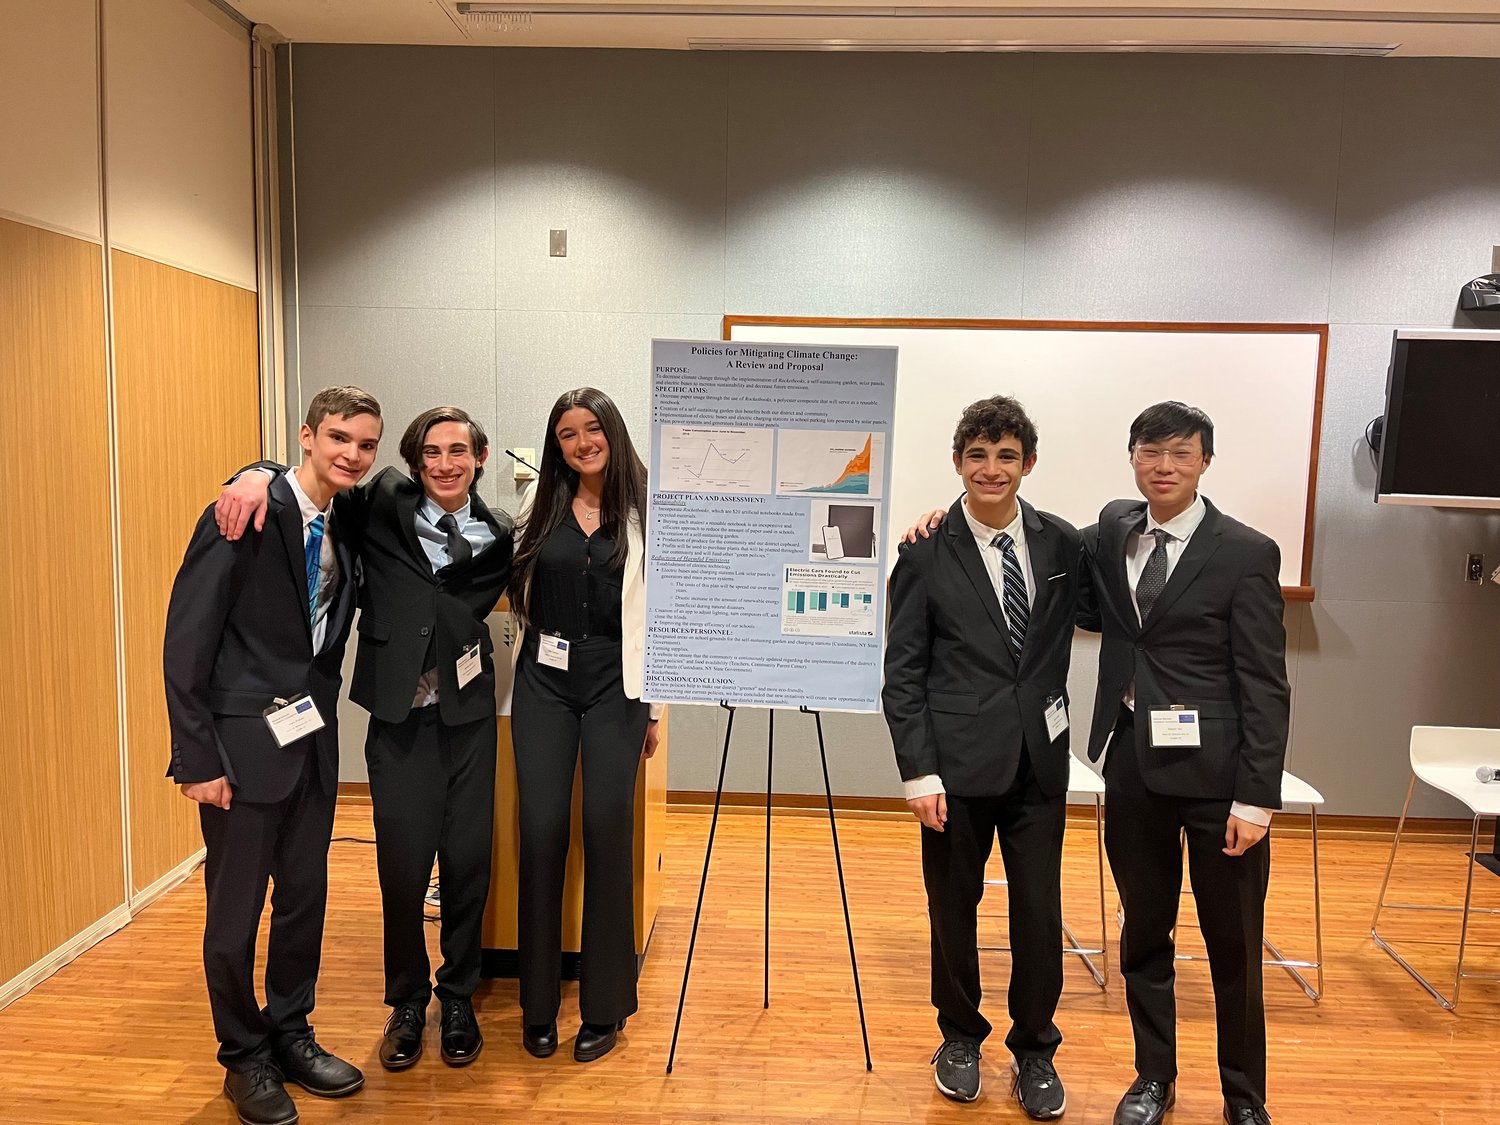 The winning team, on the day of the competition, after presenting its sustainability research on Rocketbooks — a type of reusable, eco-friendly notebook.